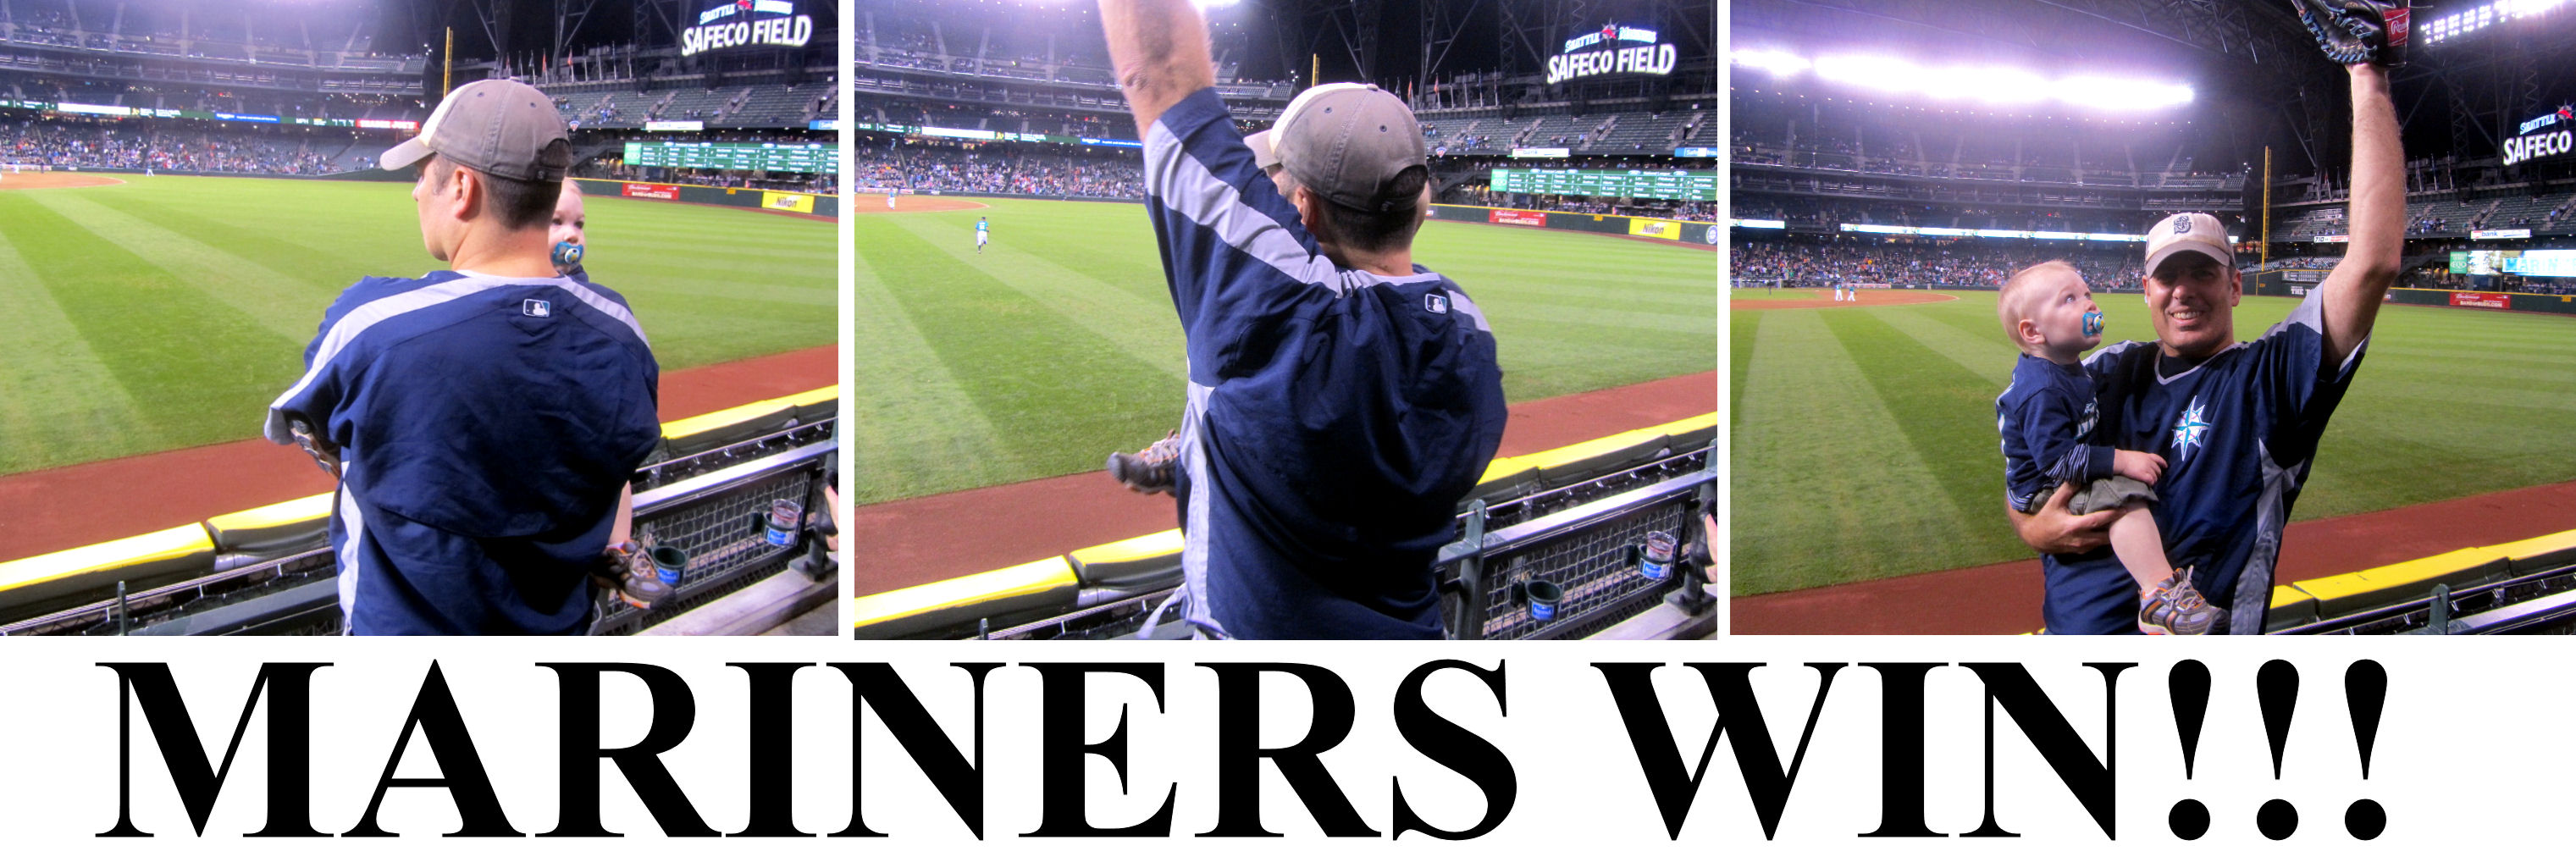 The Best MARINERS Game of 2011 (9/26/2011) « Cook & Son Bats Blog